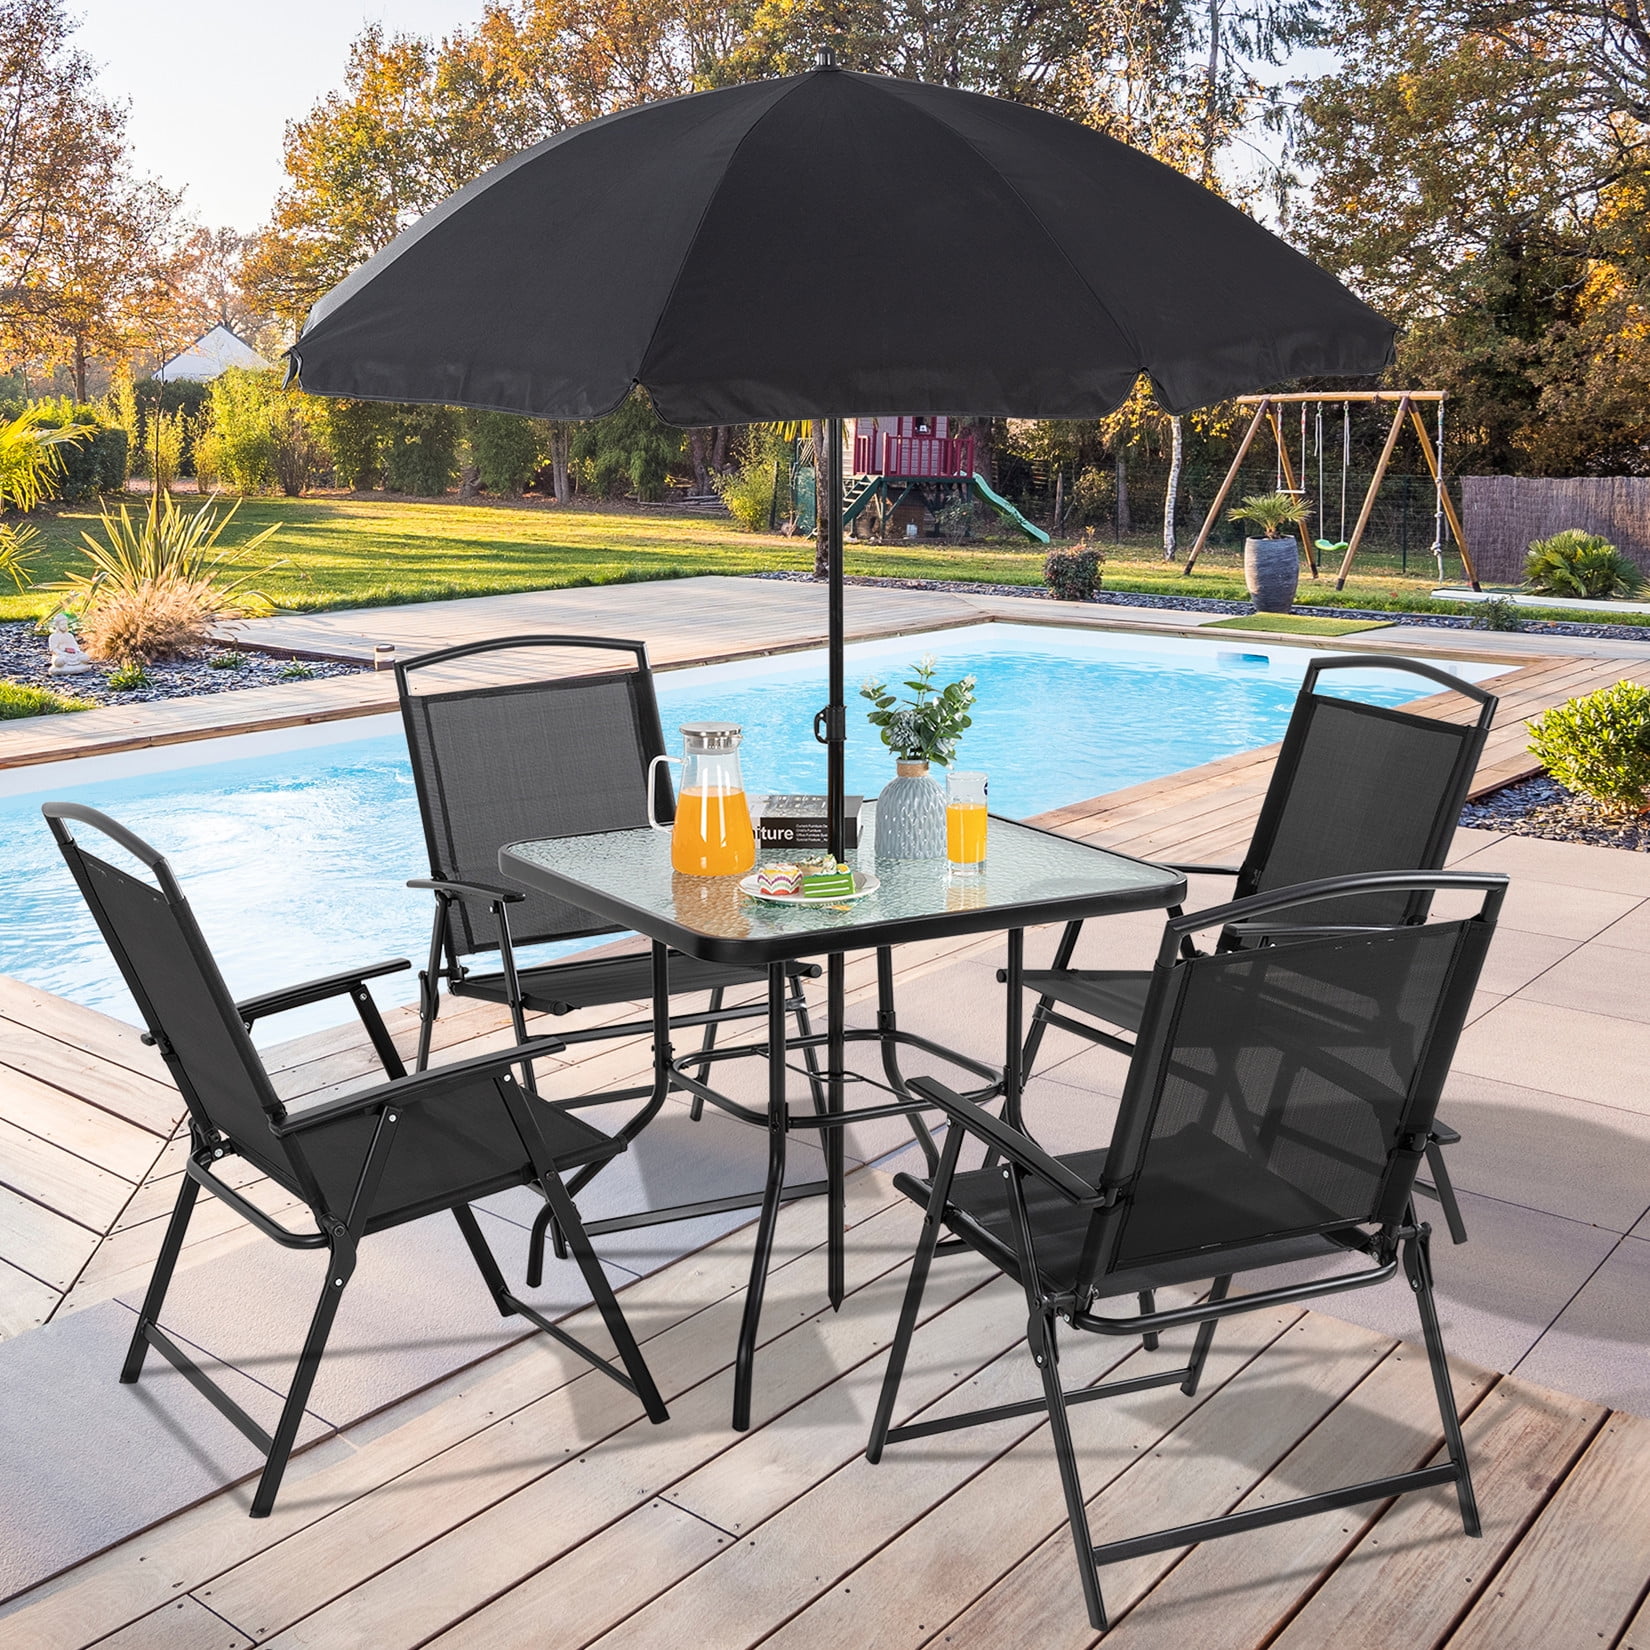 6 PCS Patio Garden Set Furniture 4 Folding Chairs Table with Umbrella Gray New 